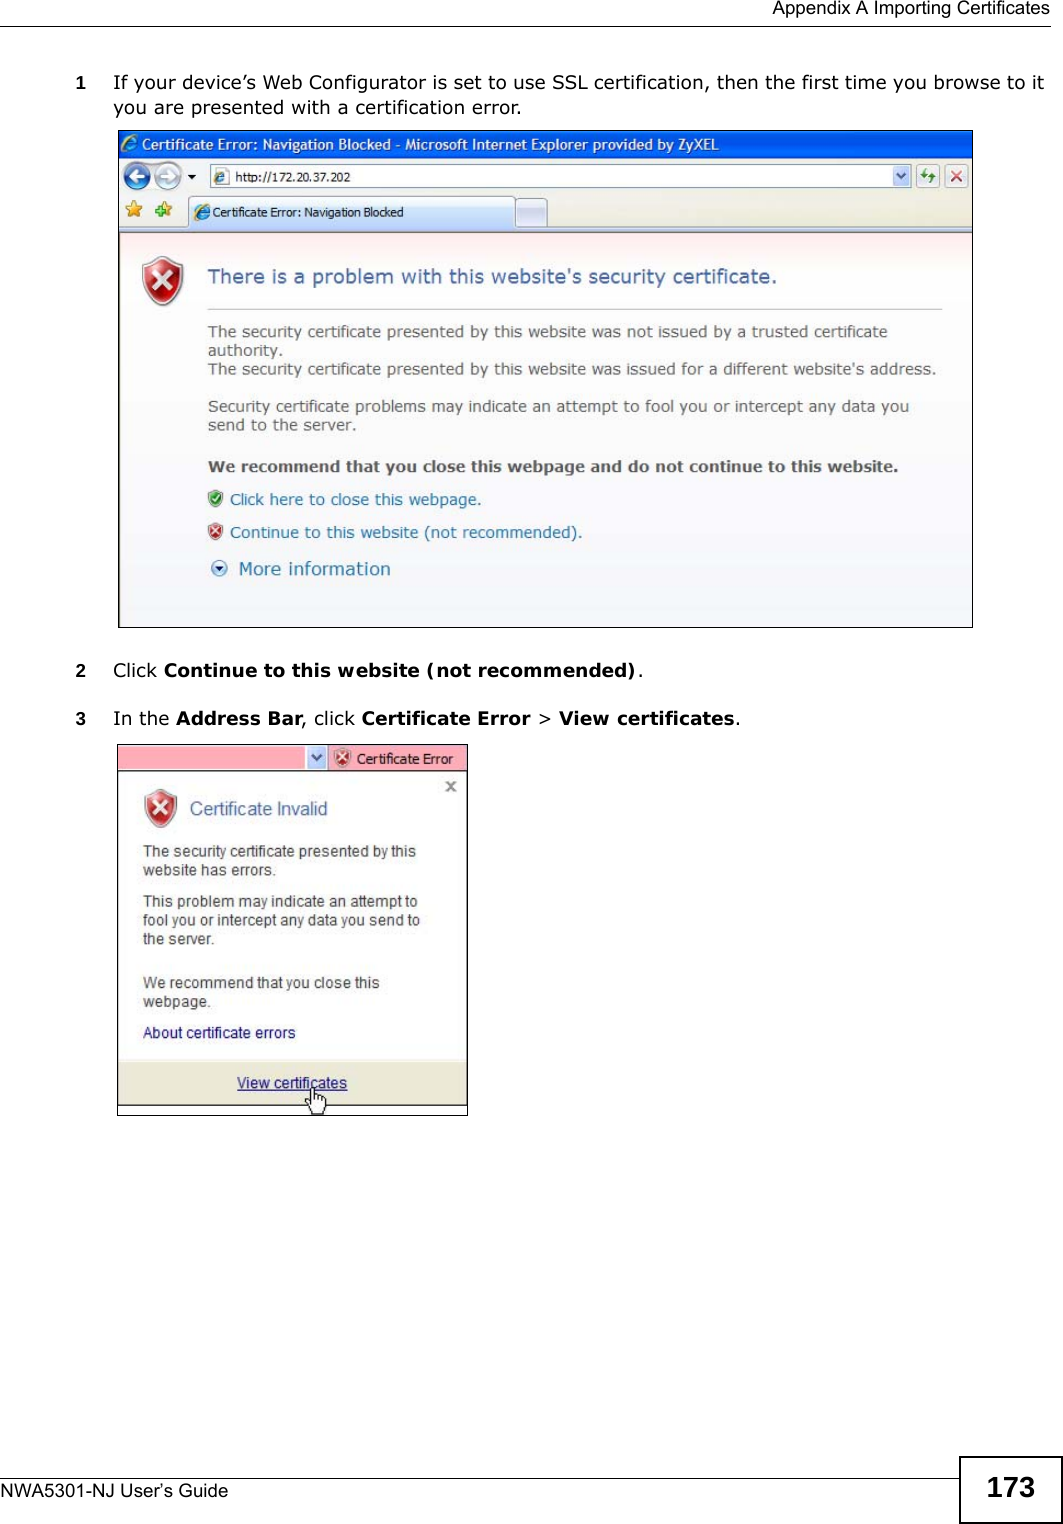  Appendix A Importing CertificatesNWA5301-NJ User’s Guide 1731If your device’s Web Configurator is set to use SSL certification, then the first time you browse to it you are presented with a certification error.2Click Continue to this website (not recommended).3In the Address Bar, click Certificate Error &gt; View certificates.